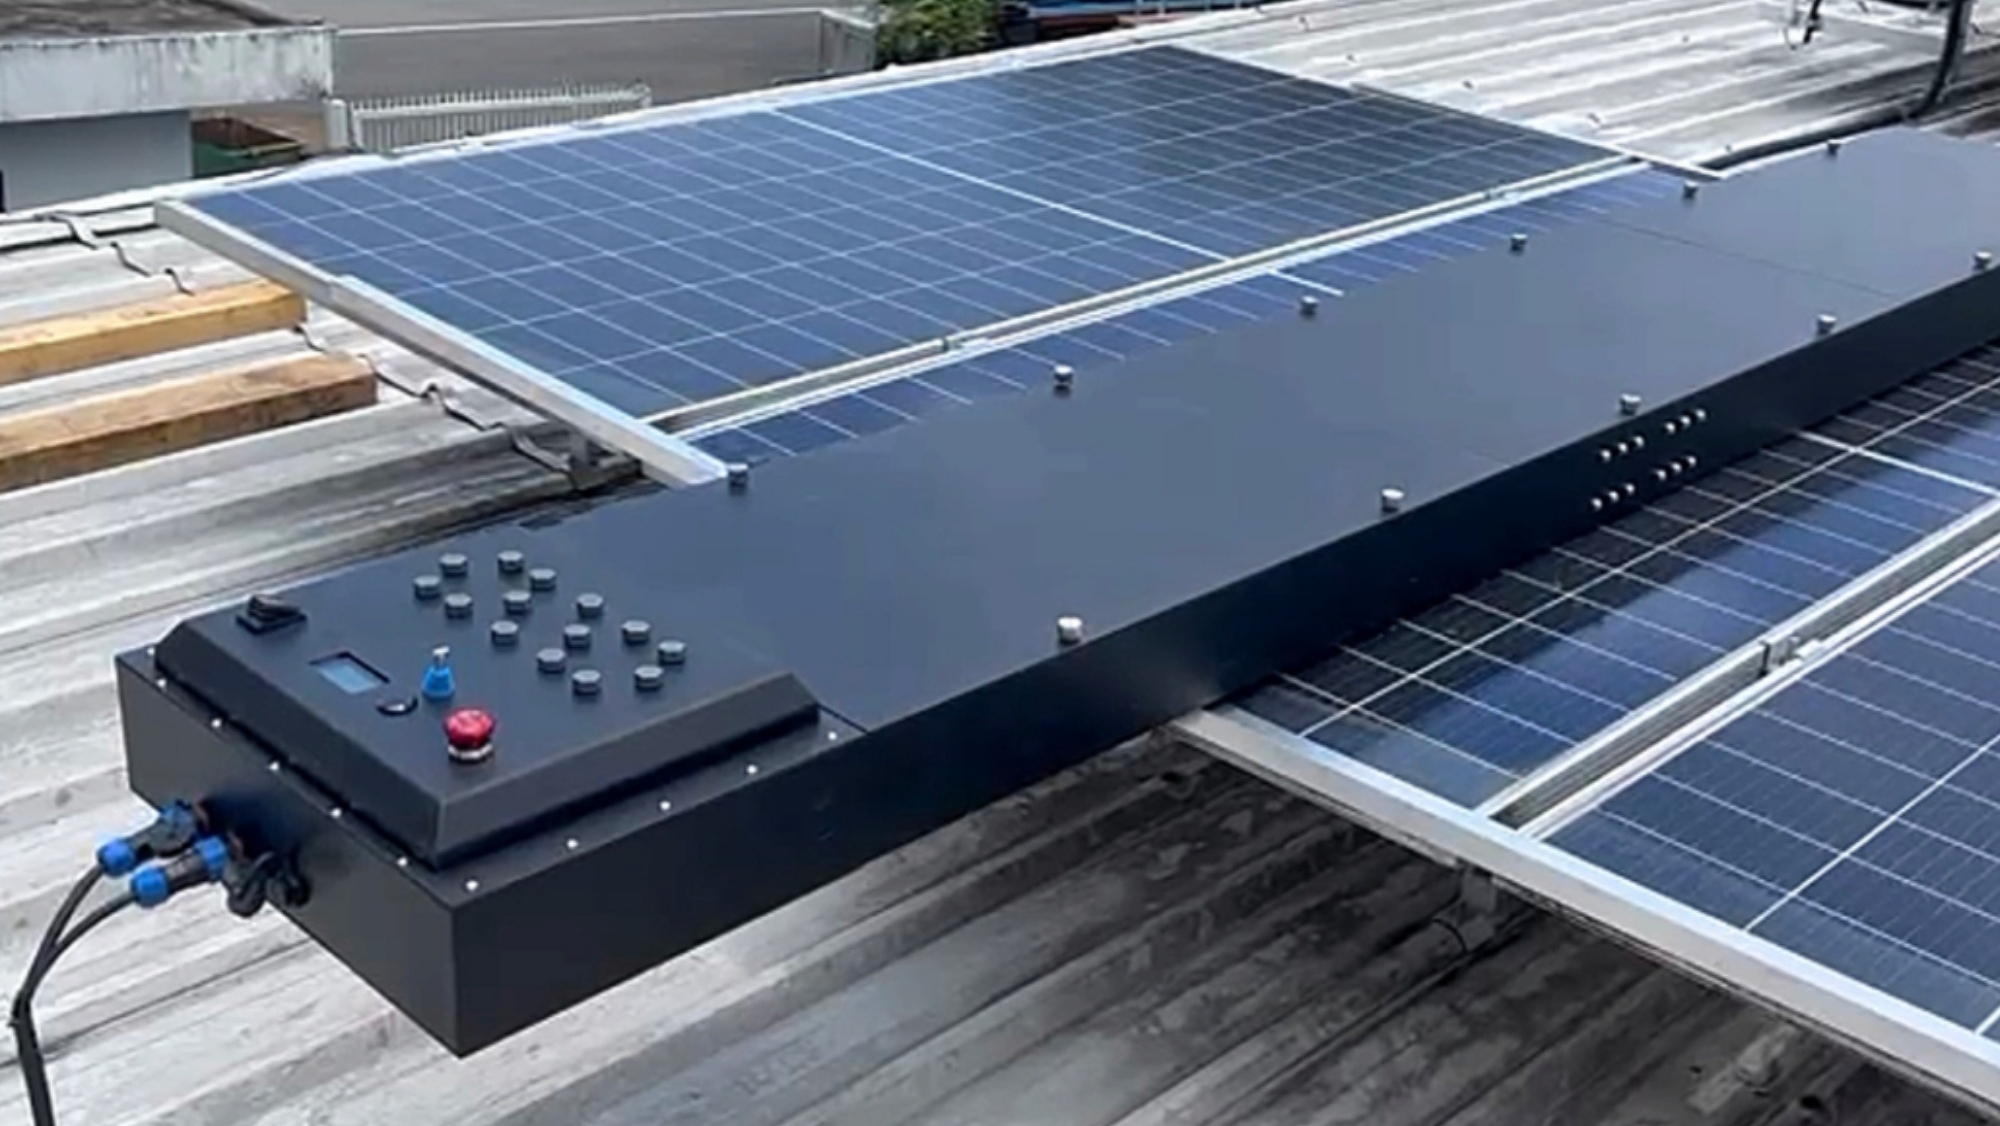 They are developing a revolutionary technology capable of renovating even the most damaged solar panels